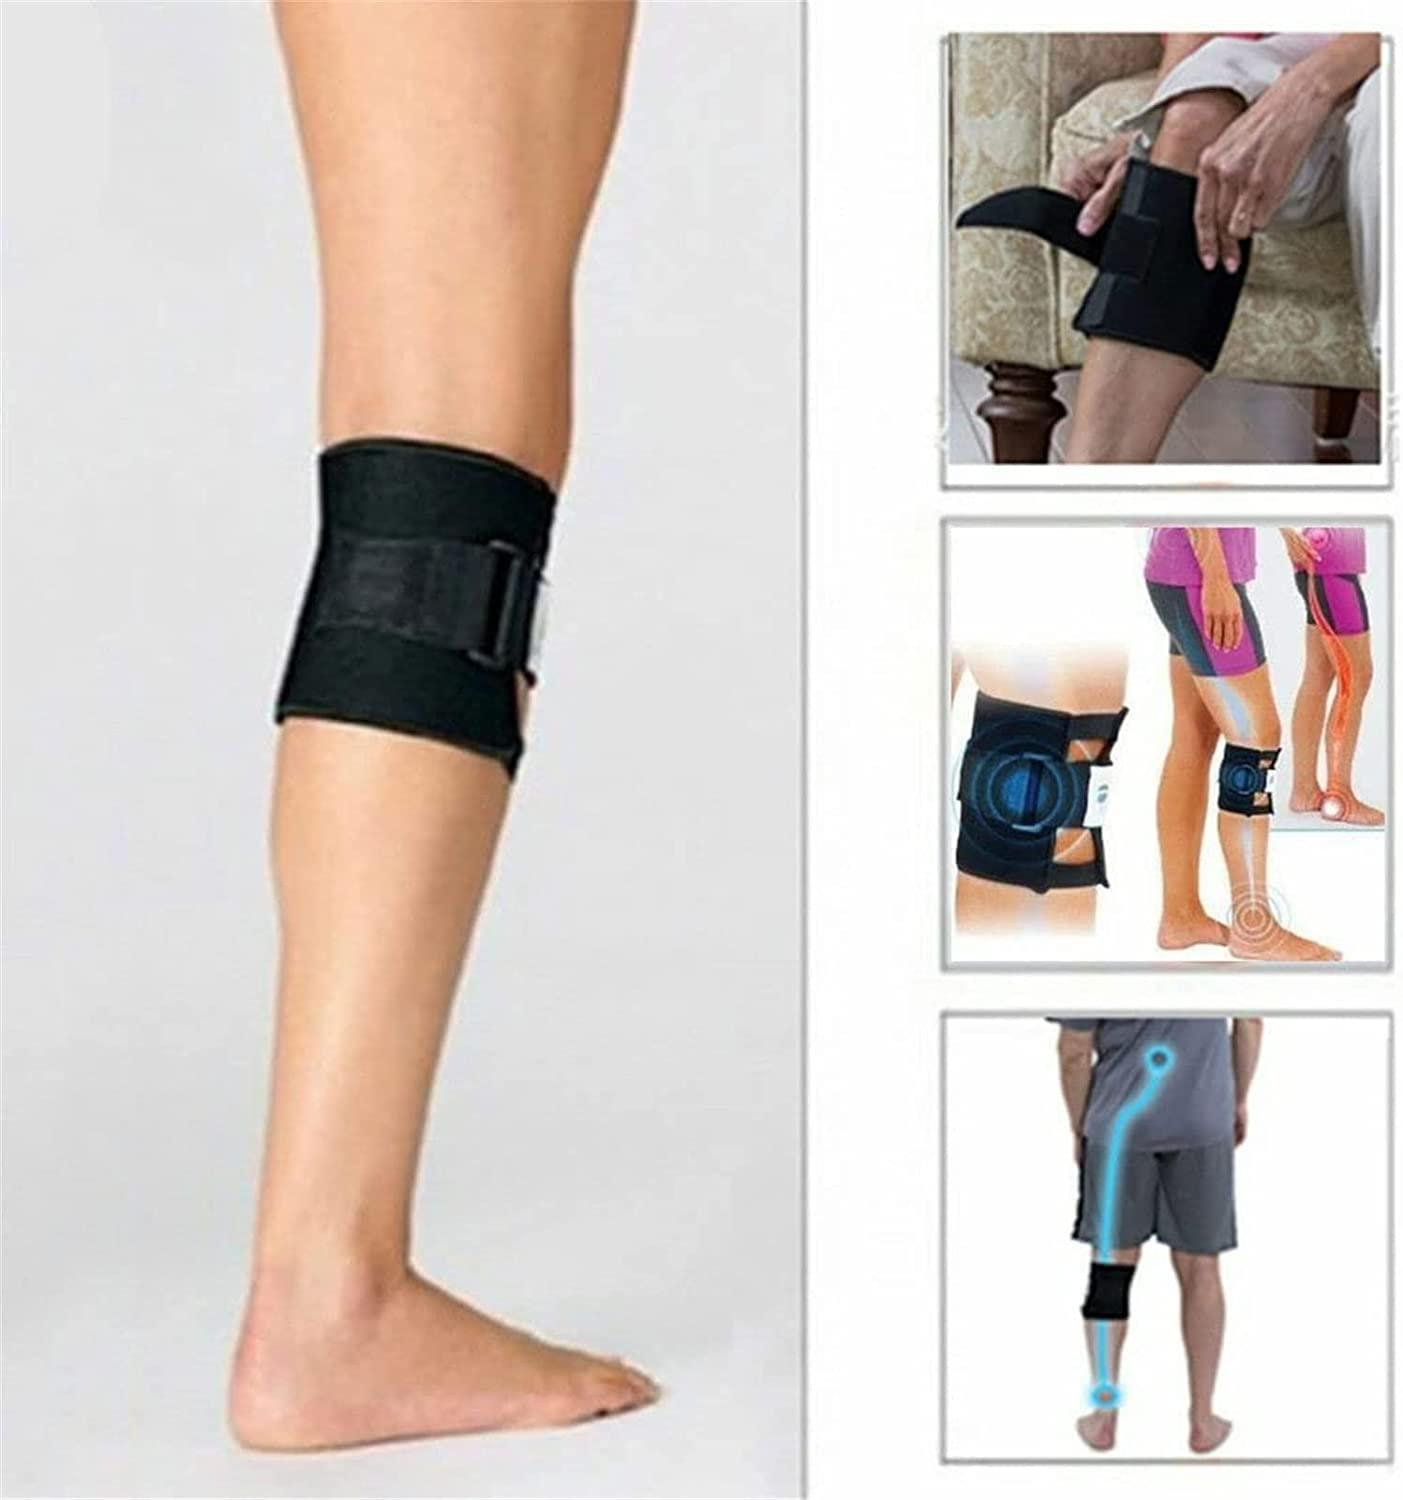 KAIJIELY Sciatica Pain Relief Brace For Sciatic Nerve Pain,Sciatica as Seen  on tv for Instant Relief from Sciatic Nerve Pain, Acupoint Pressure Pad